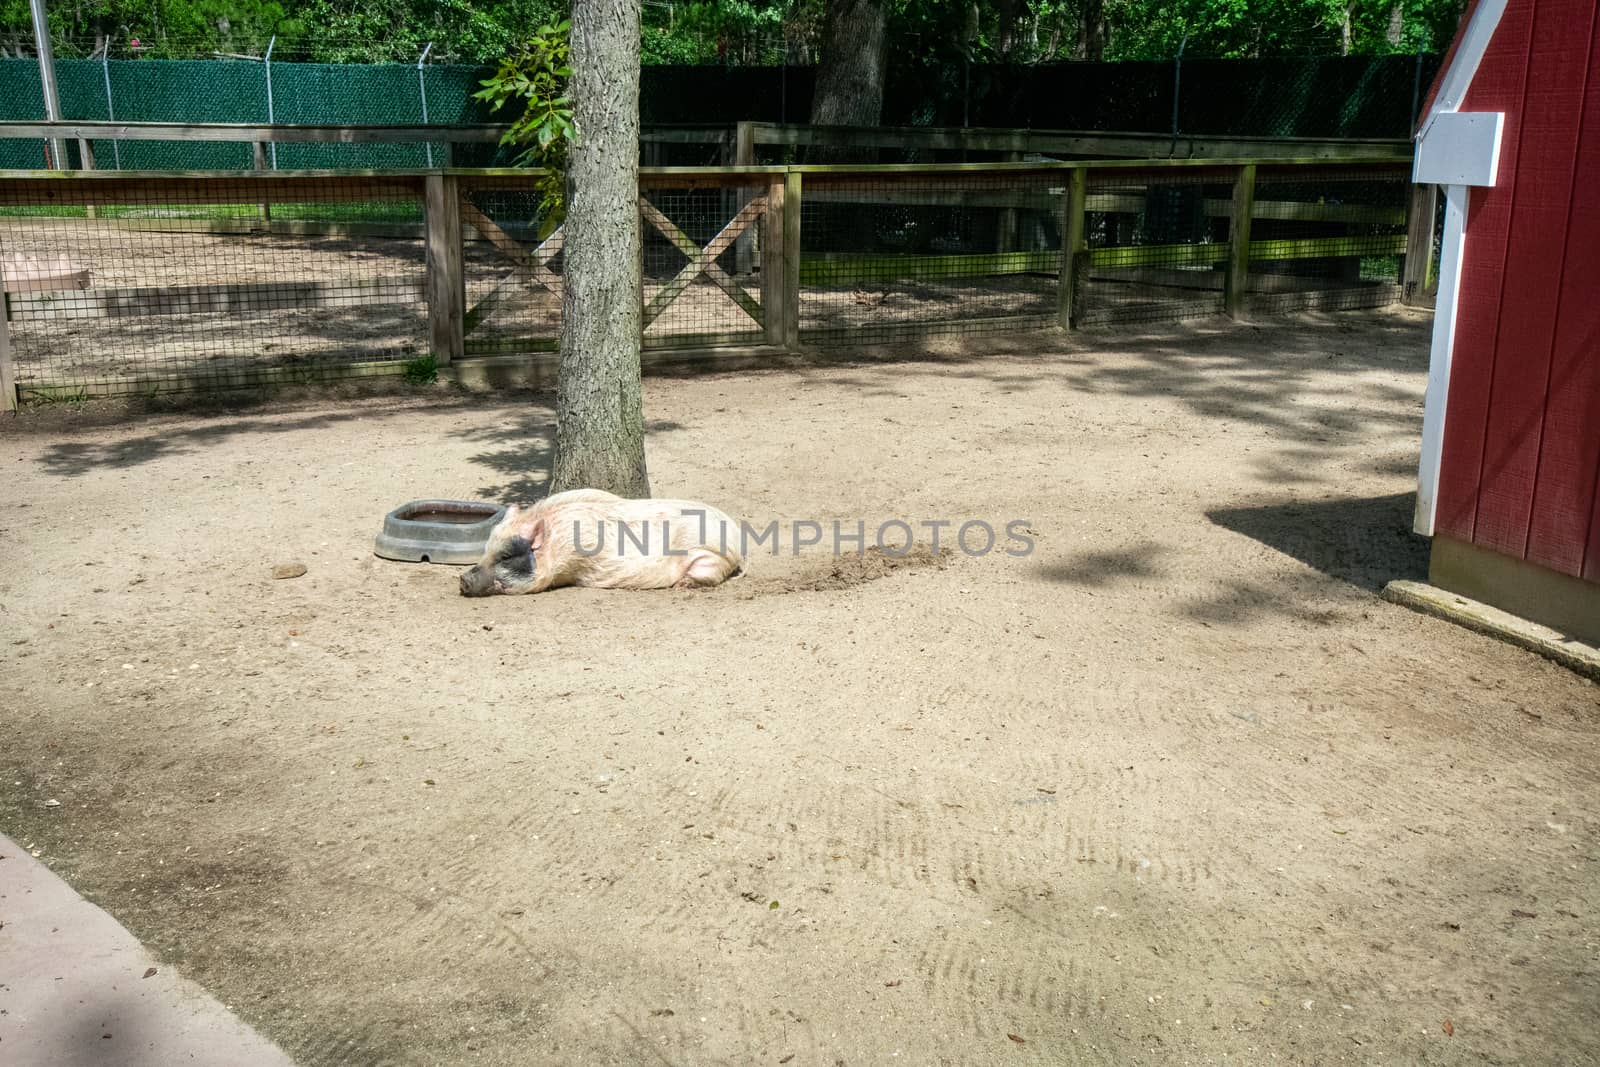 A Large White Hog Laying Down in an Enclosure in a Zoo by bju12290